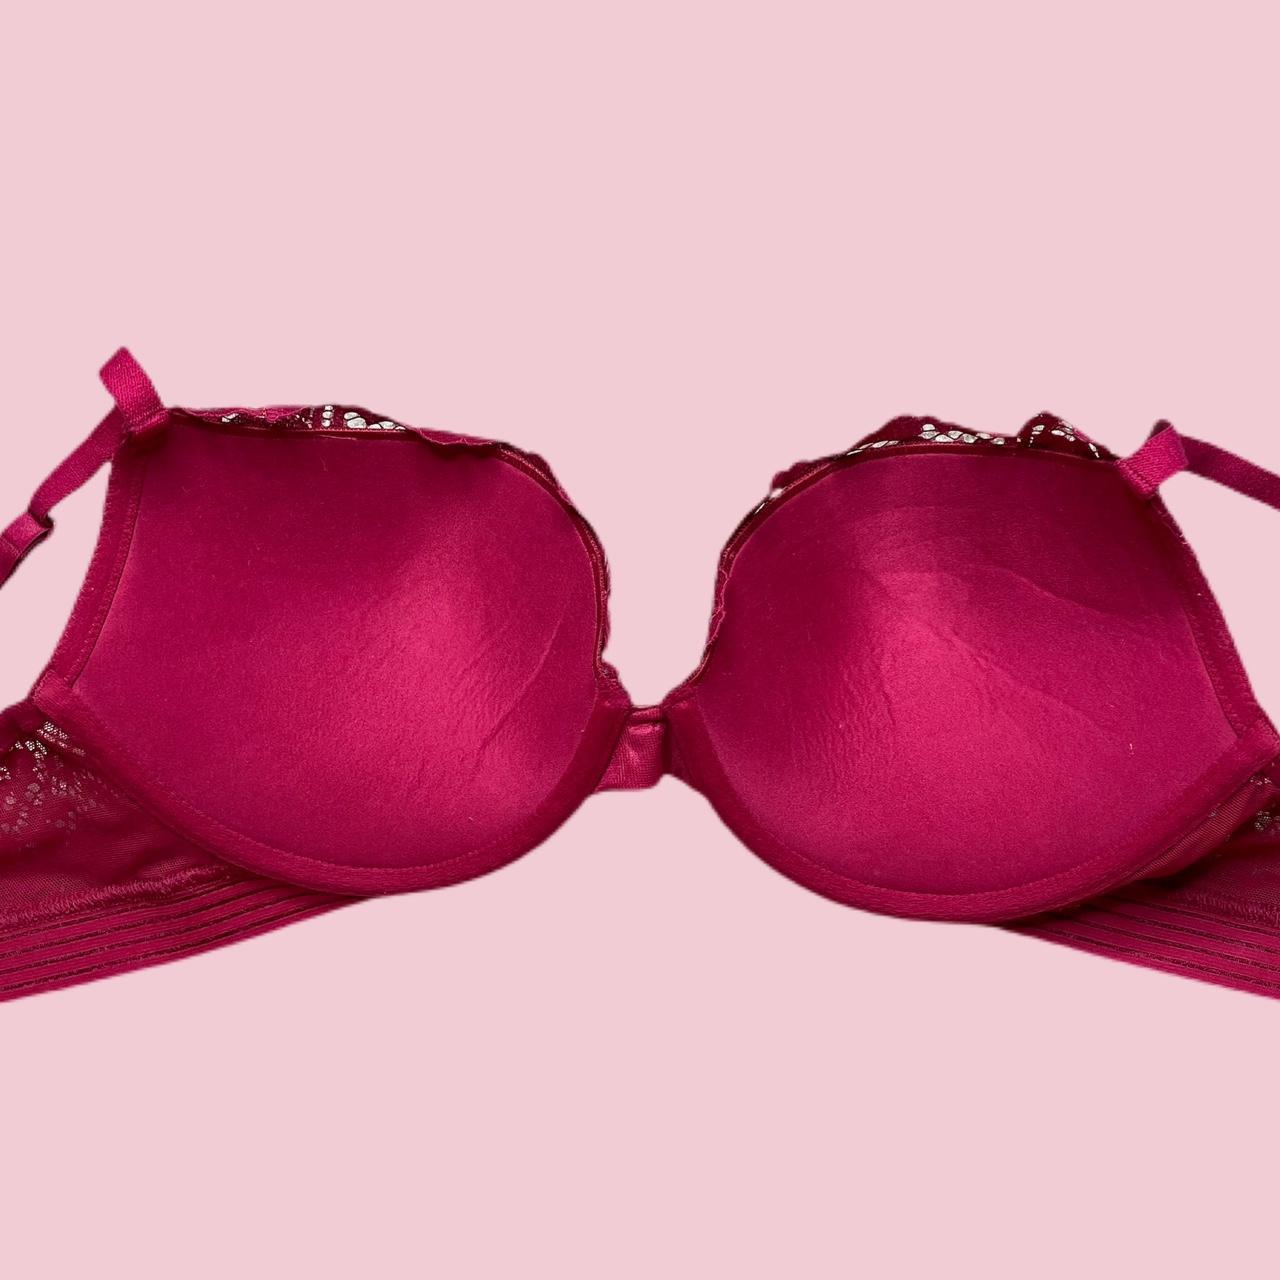 Push-Up And Padded Bras, Pink, Cute Bras Victorias Secret Push Up